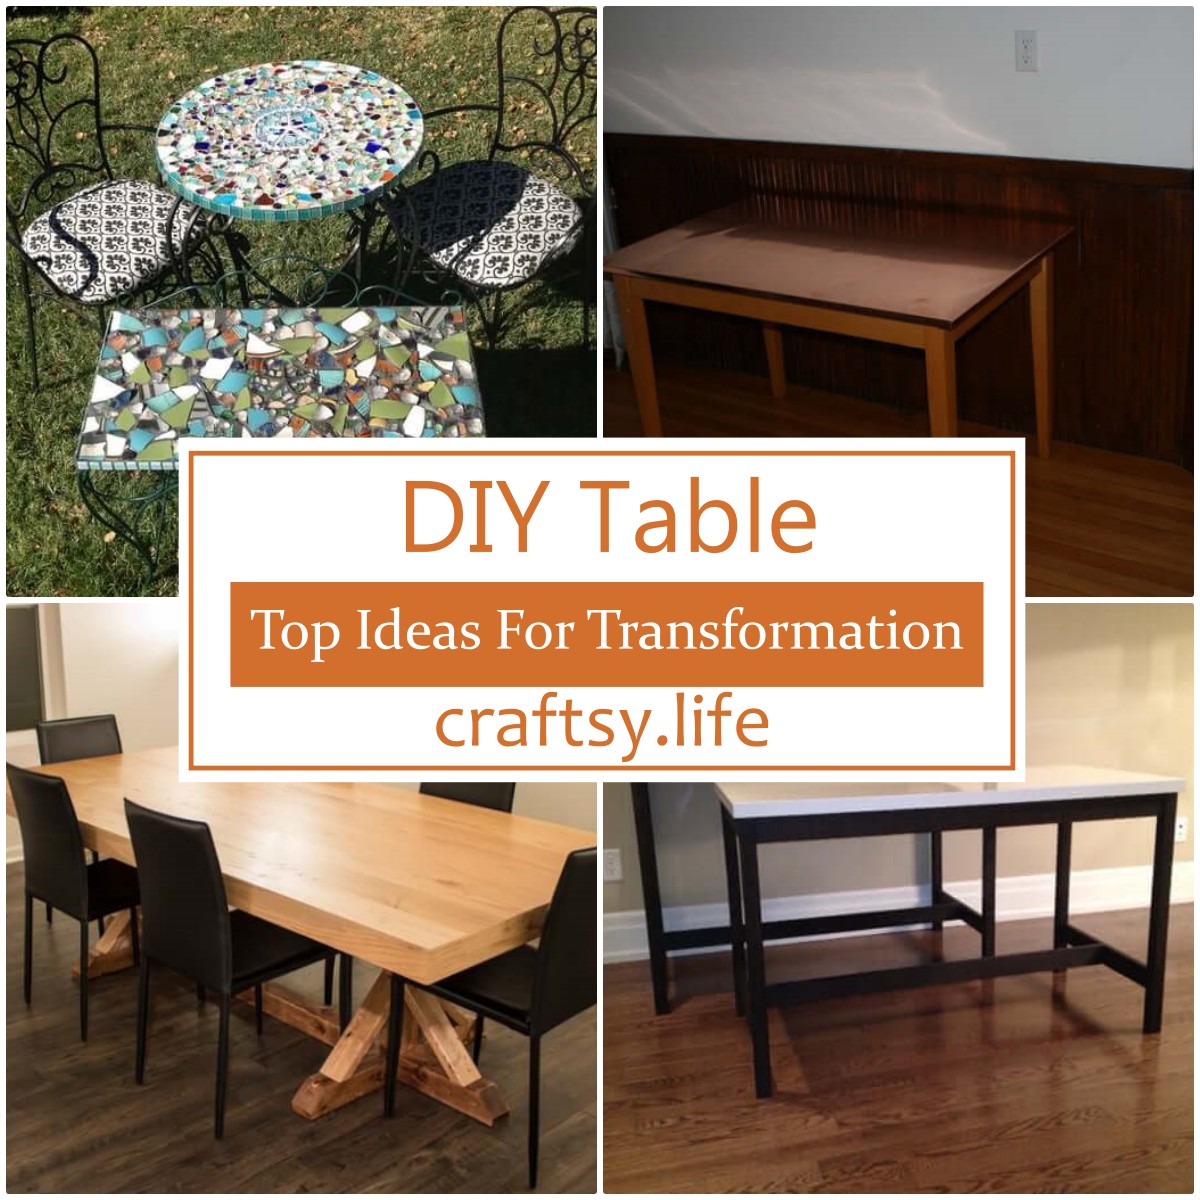 DIY Table Top Ideas For Transformation